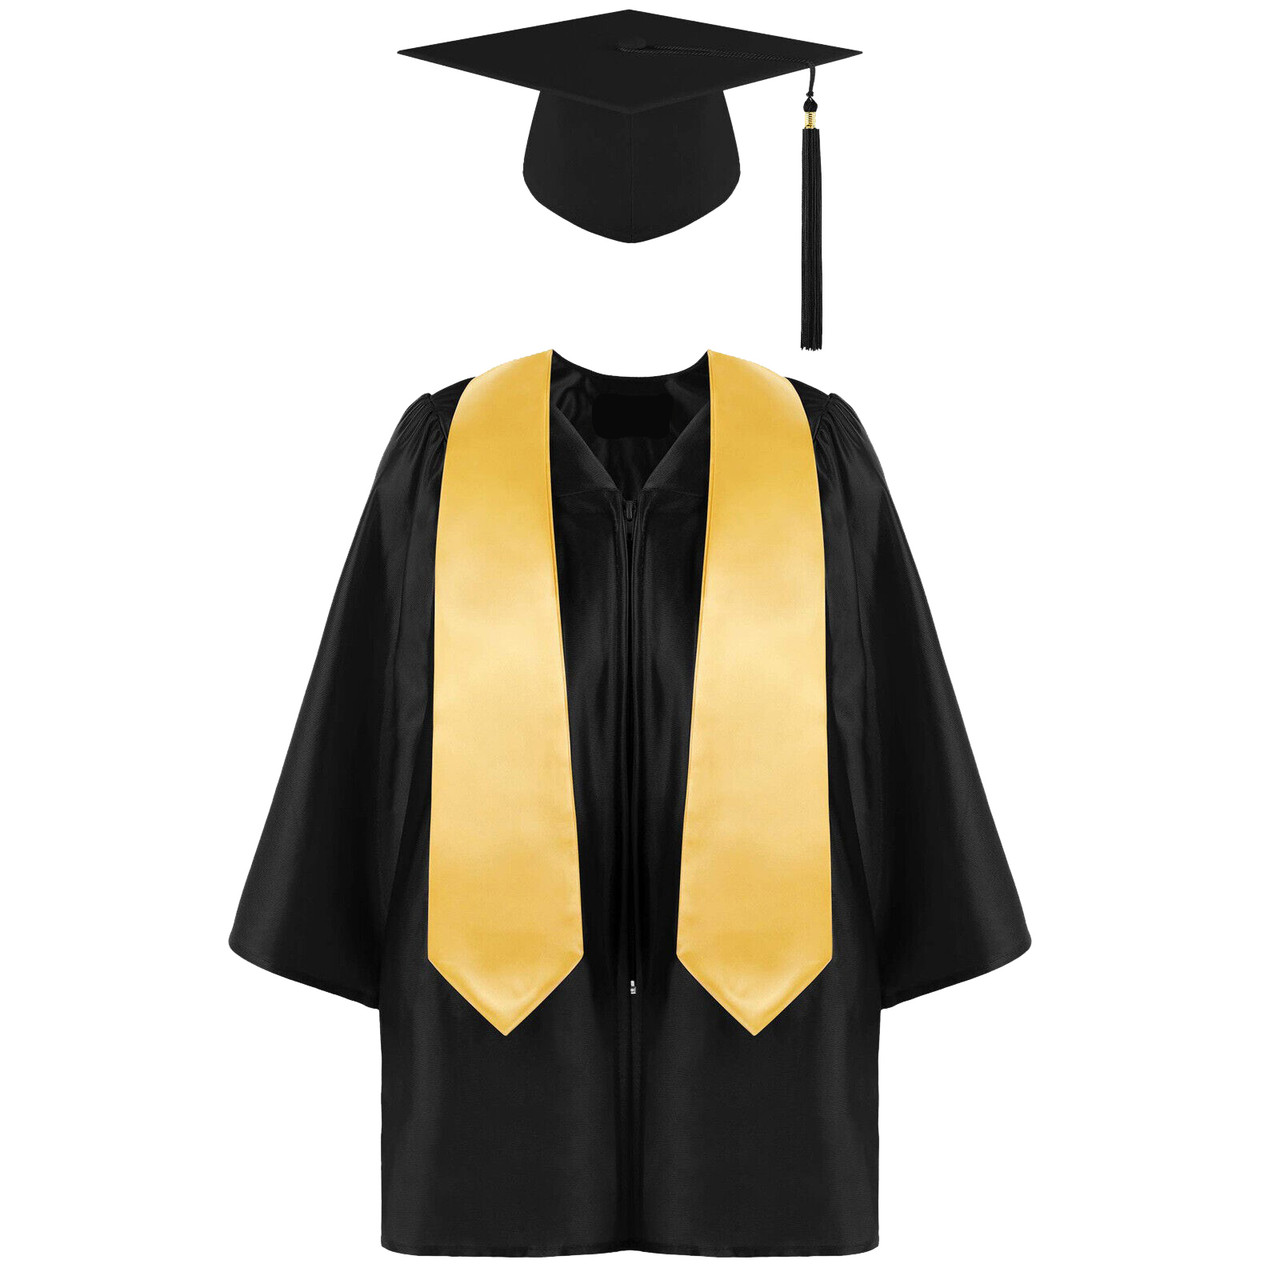 How to wear your graduation gown and mortarboard - YouTube